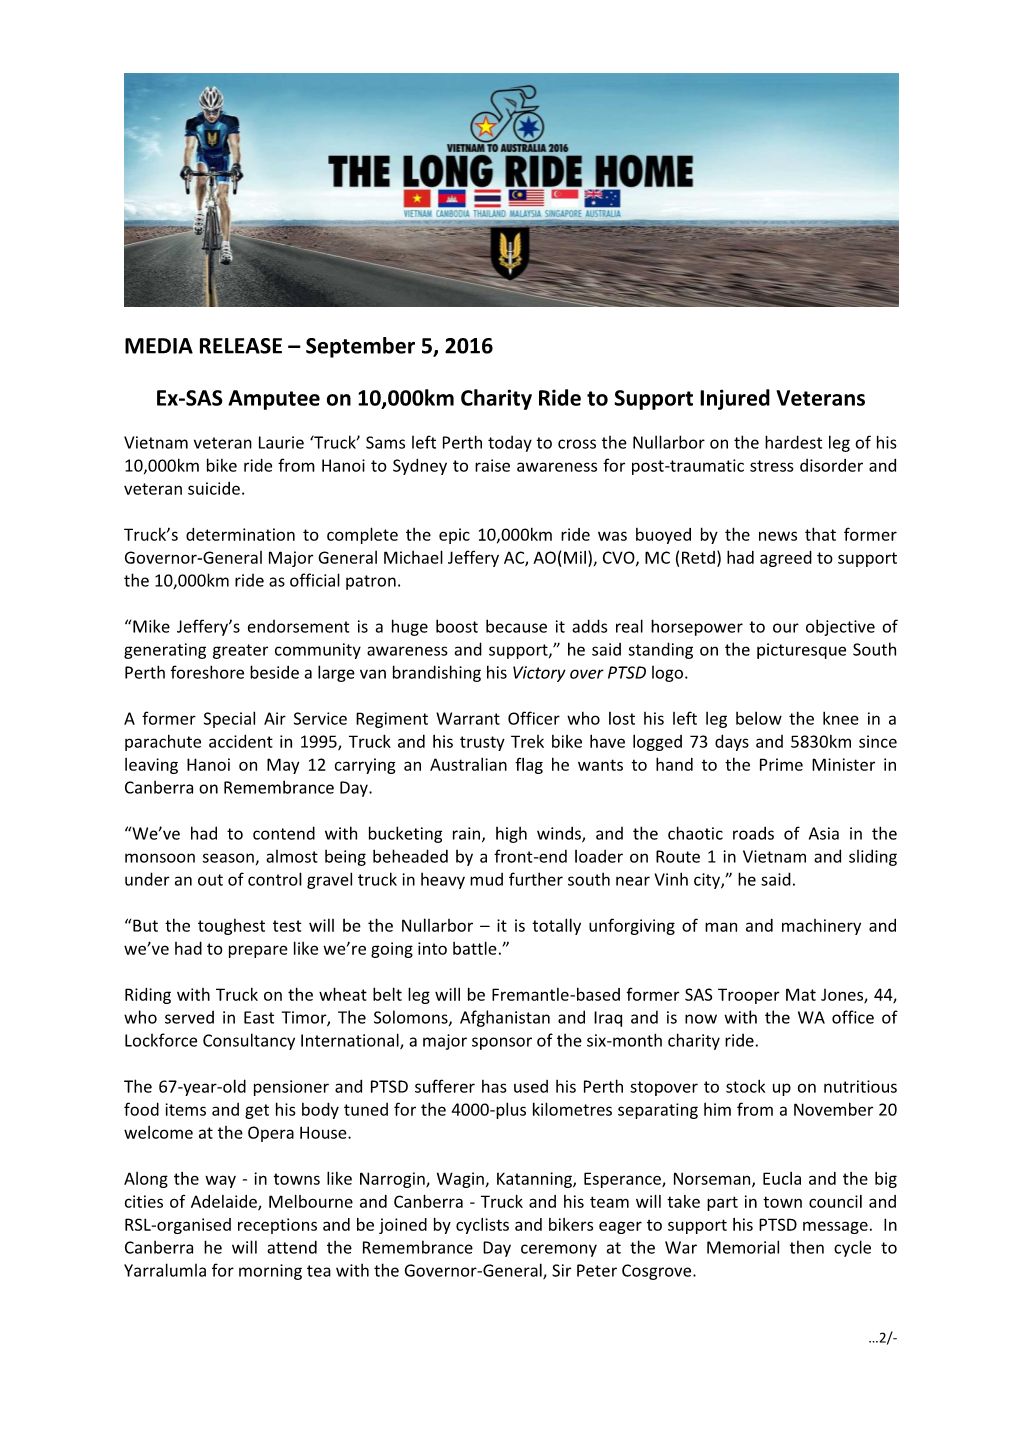 MEDIA RELEASE – September 5, 2016 Ex-SAS Amputee on 10,000Km Charity Ride to Support Injured Veterans